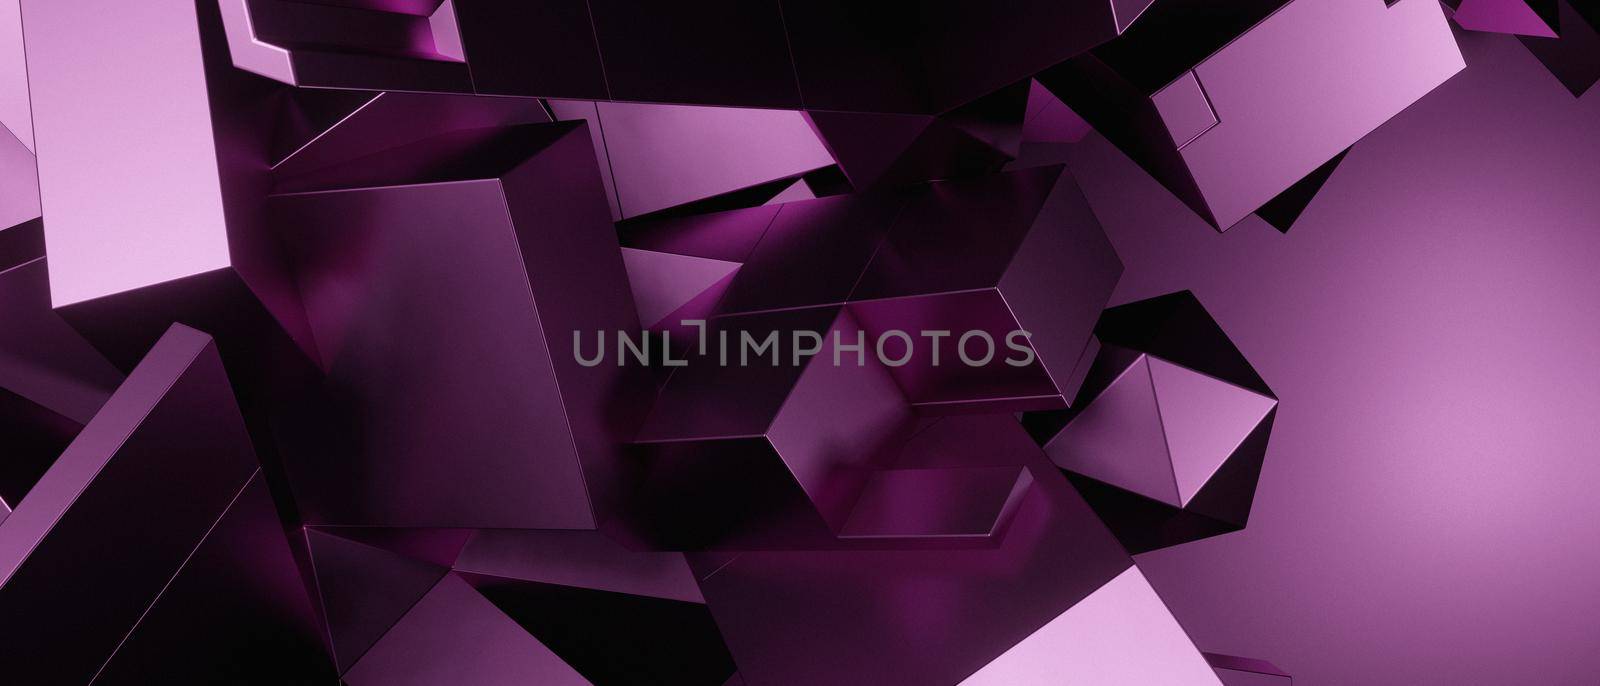 Abstract Shiny 3D SciFi Chaos Trendy Futuristic Purple Violet Background Wallpaper 3D Render